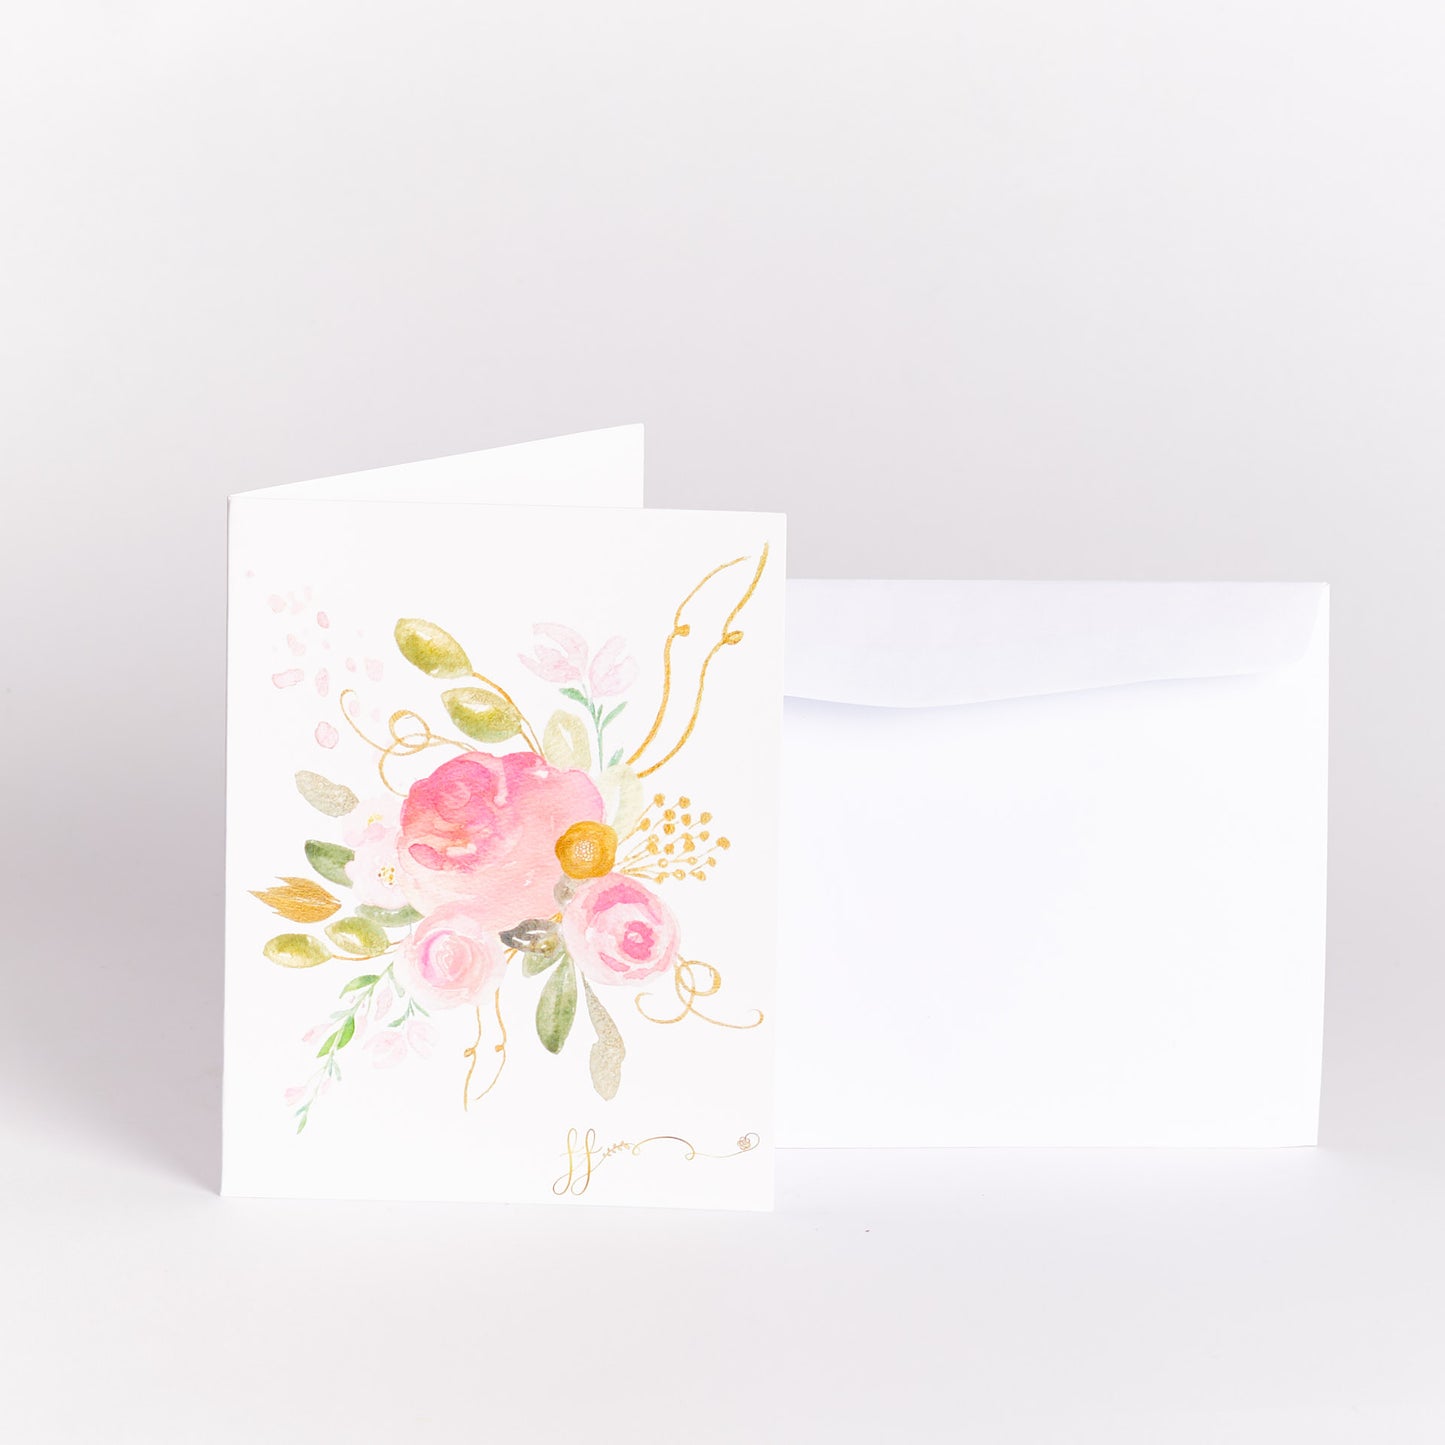 Forever Flowering Greeting Card and Envelope